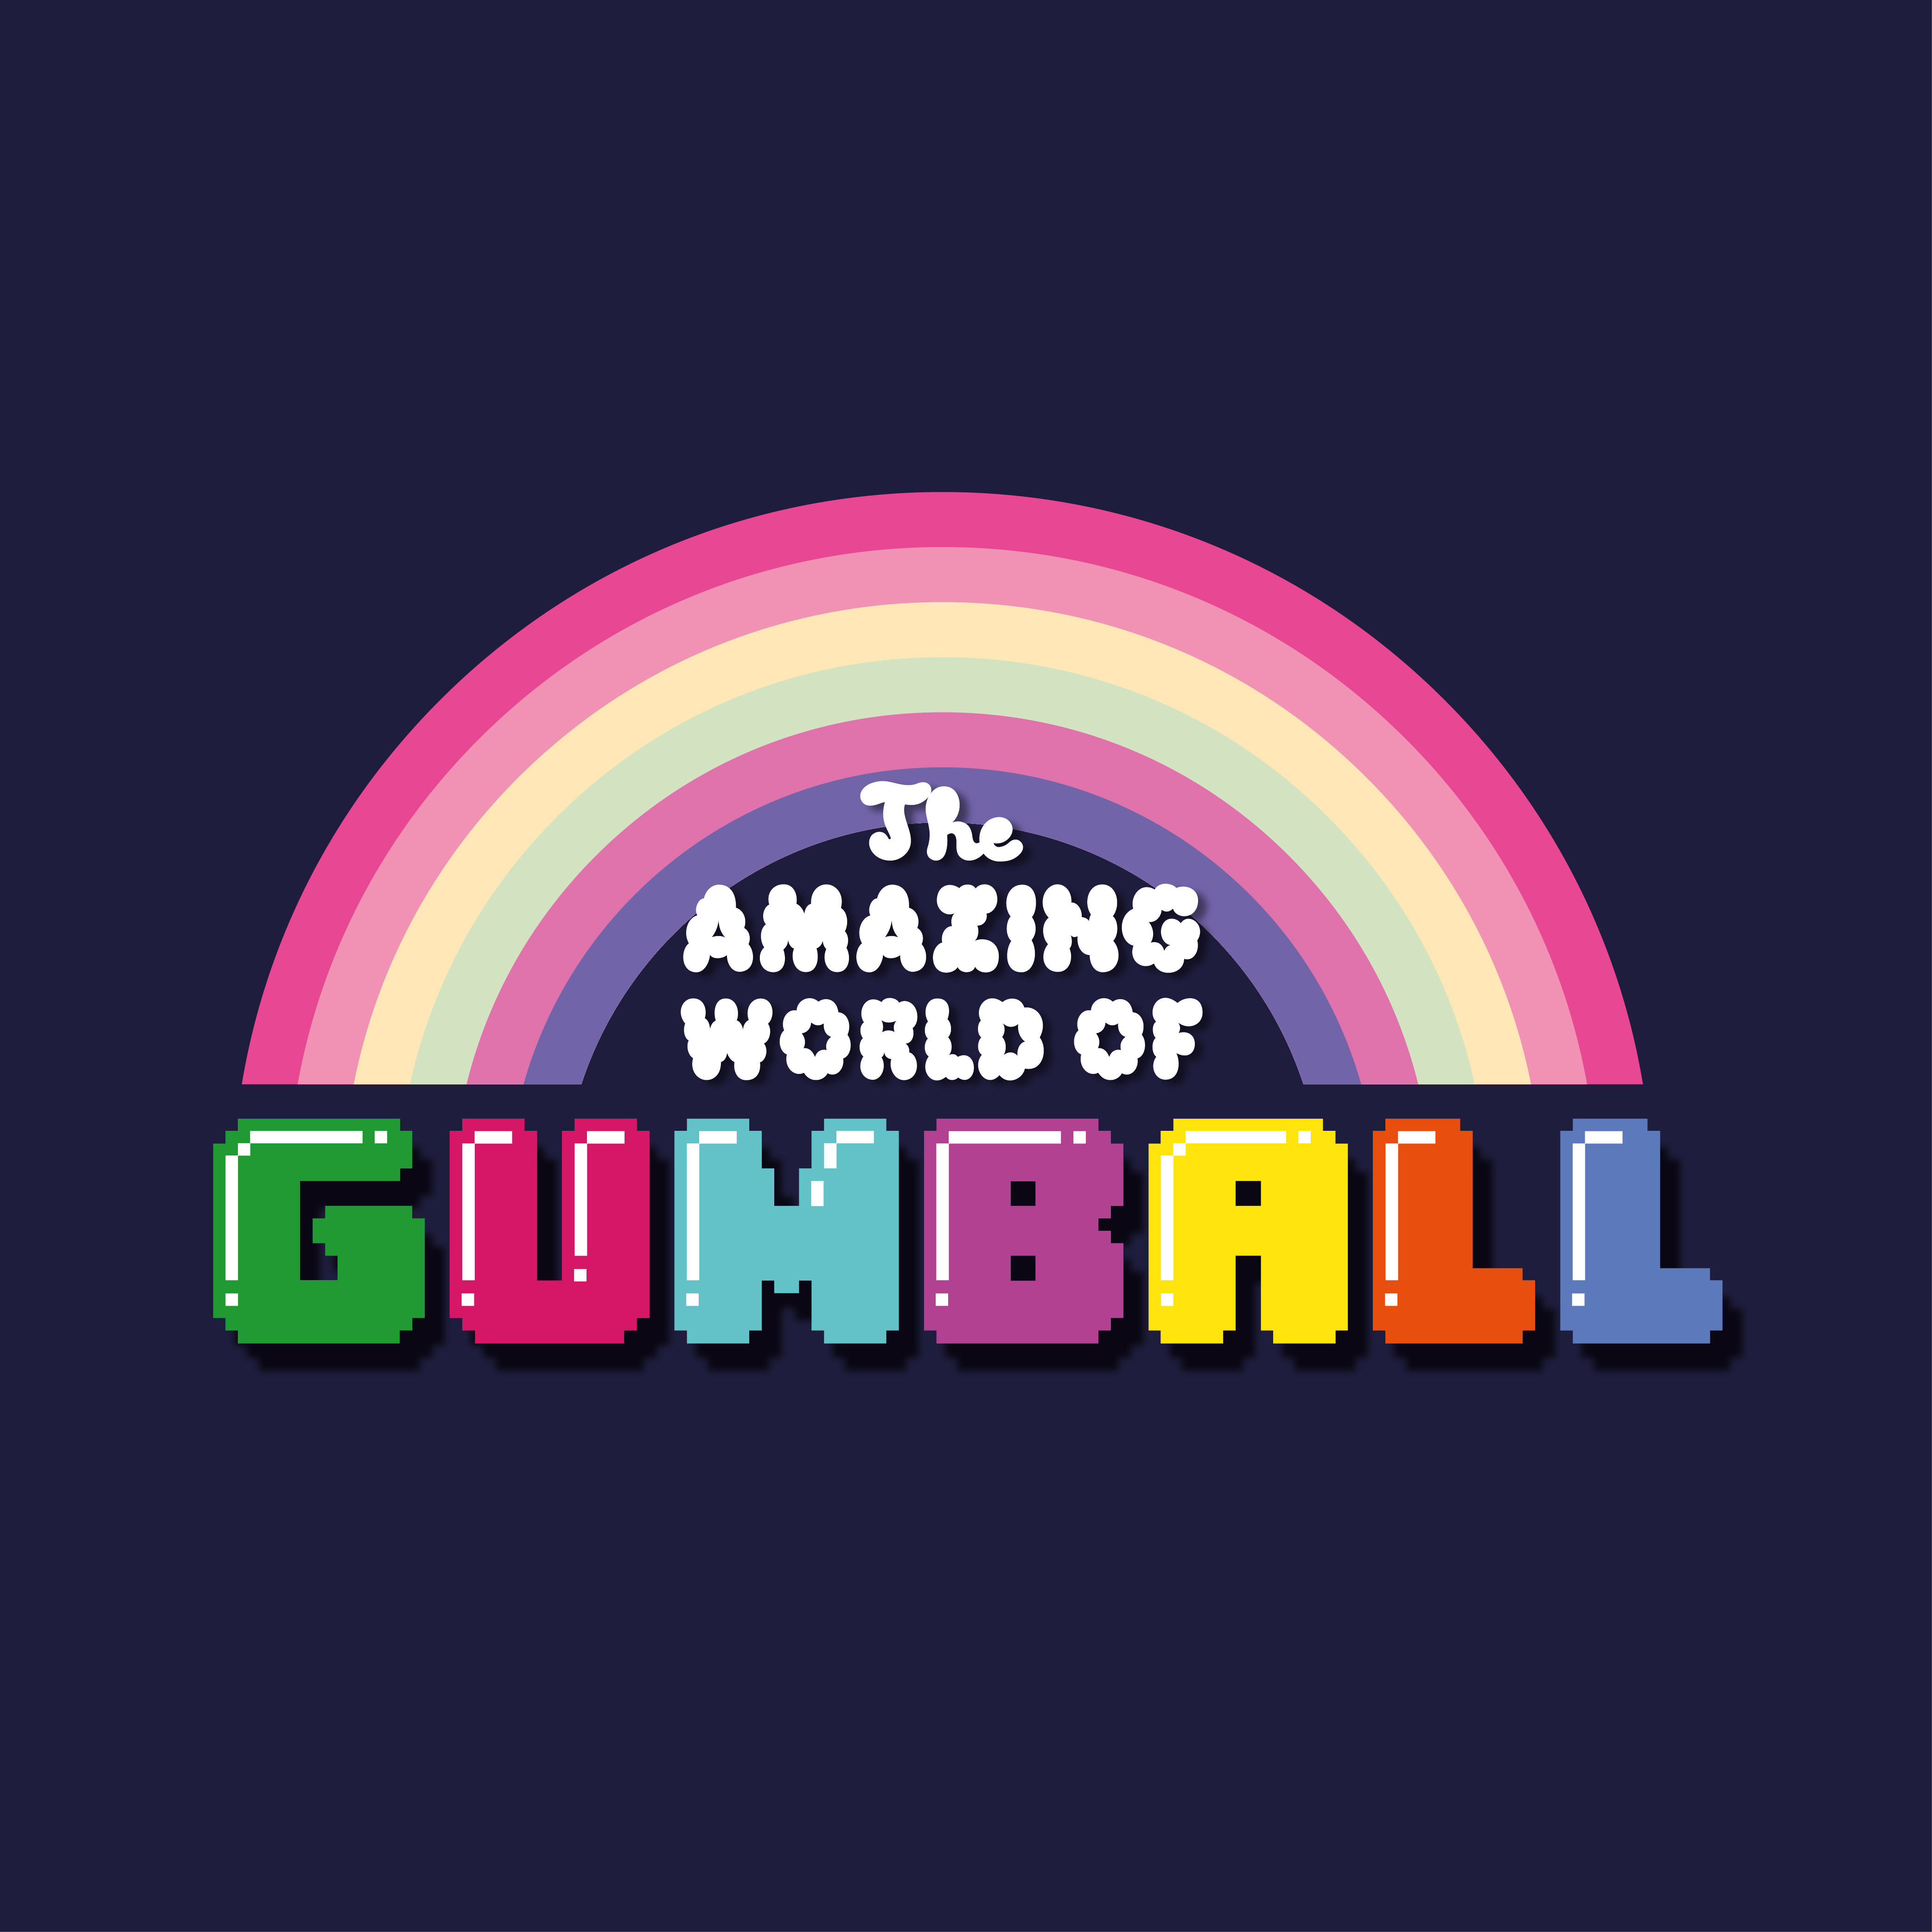 The Amazing World of Gumball (A Review) – Toonopolis, The Blog